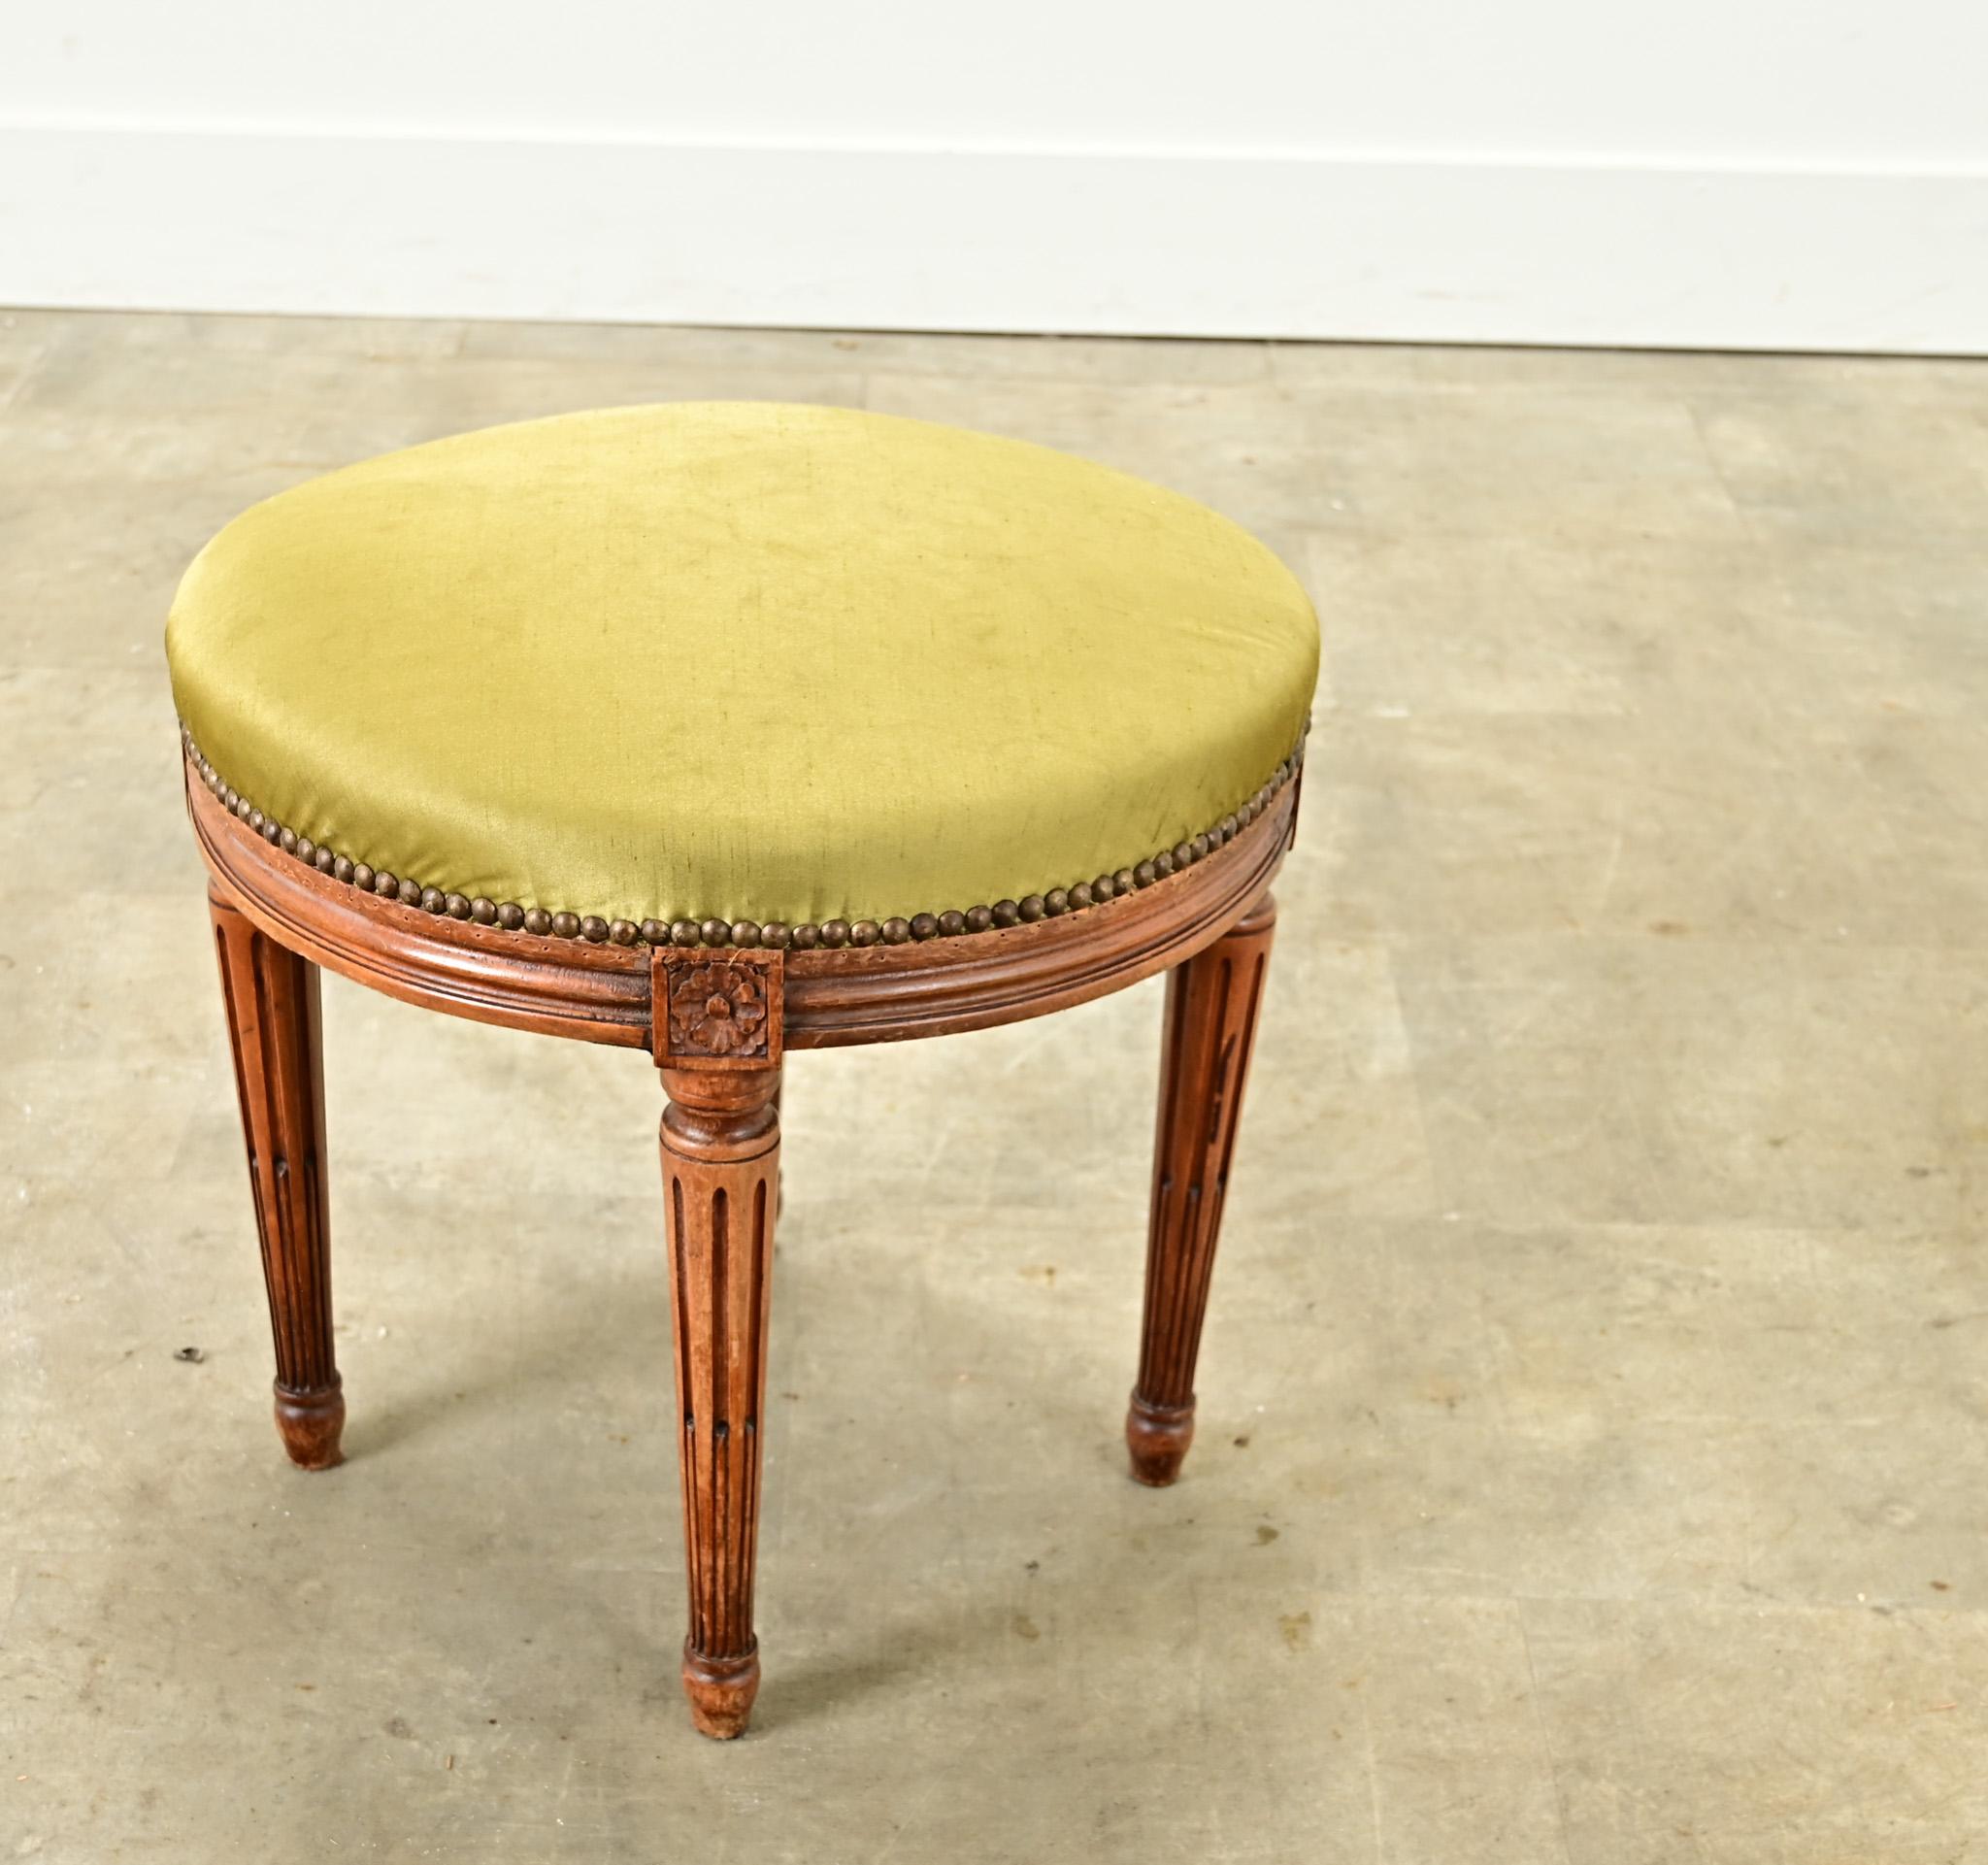 19th Century French Louis XVI Style Upholstered Stool For Sale